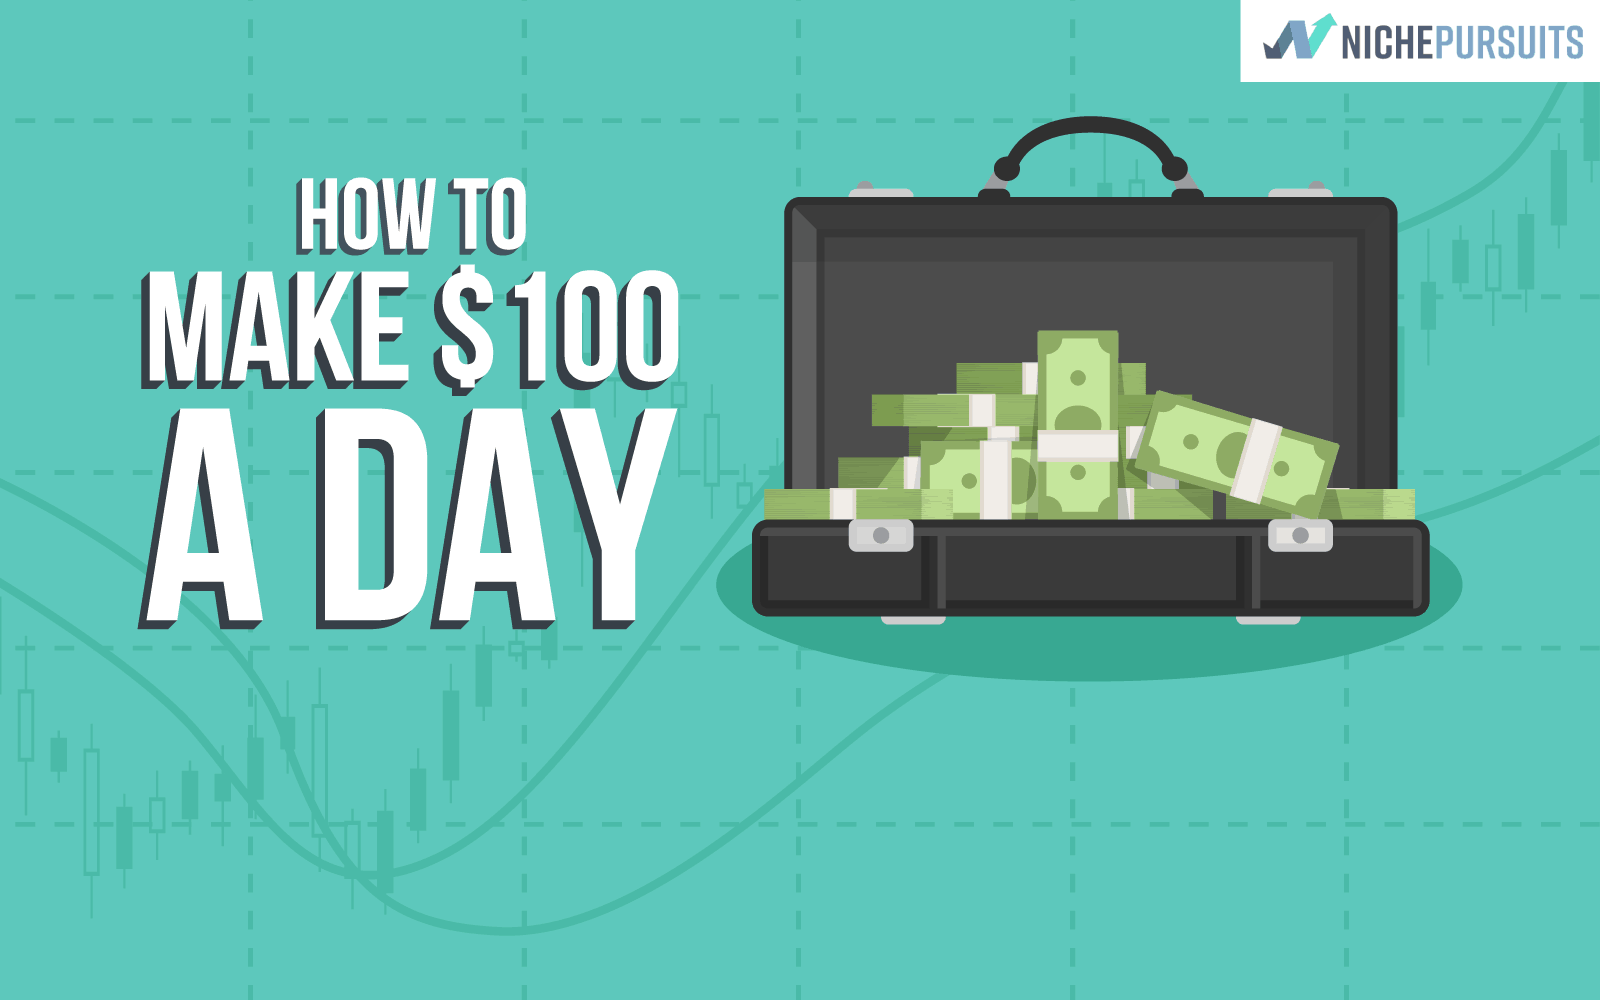 Amazon.com: 8 Websites that Pay Daily 100 Dollars 2020 - How to Make $100  Per Day - Make Money Online eBook : Karmakar, Dip: Kindle Store